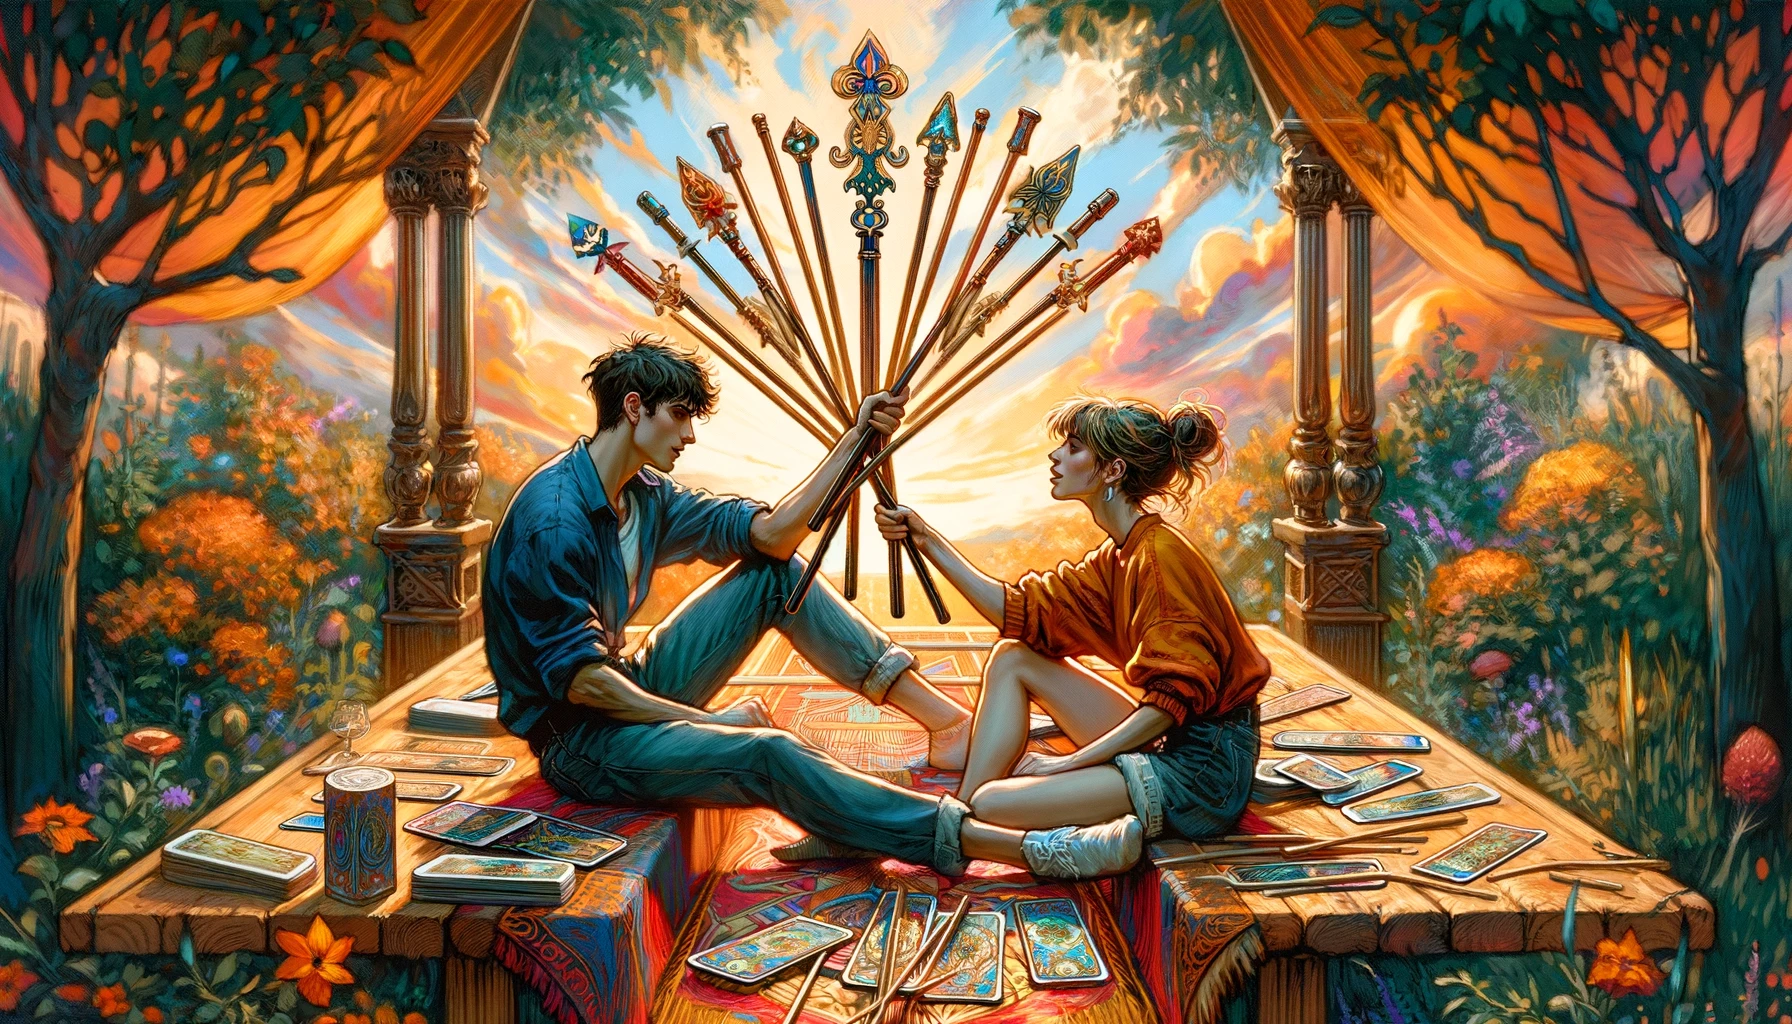 An image showing a couple engaged in lively discussion or playful competition. The visual highlights dynamic interaction within a relationship, emphasizing the constructive nature of addressing disagreements openly and the potential for deeper understanding and connection through facing relationship dynamics head-on.